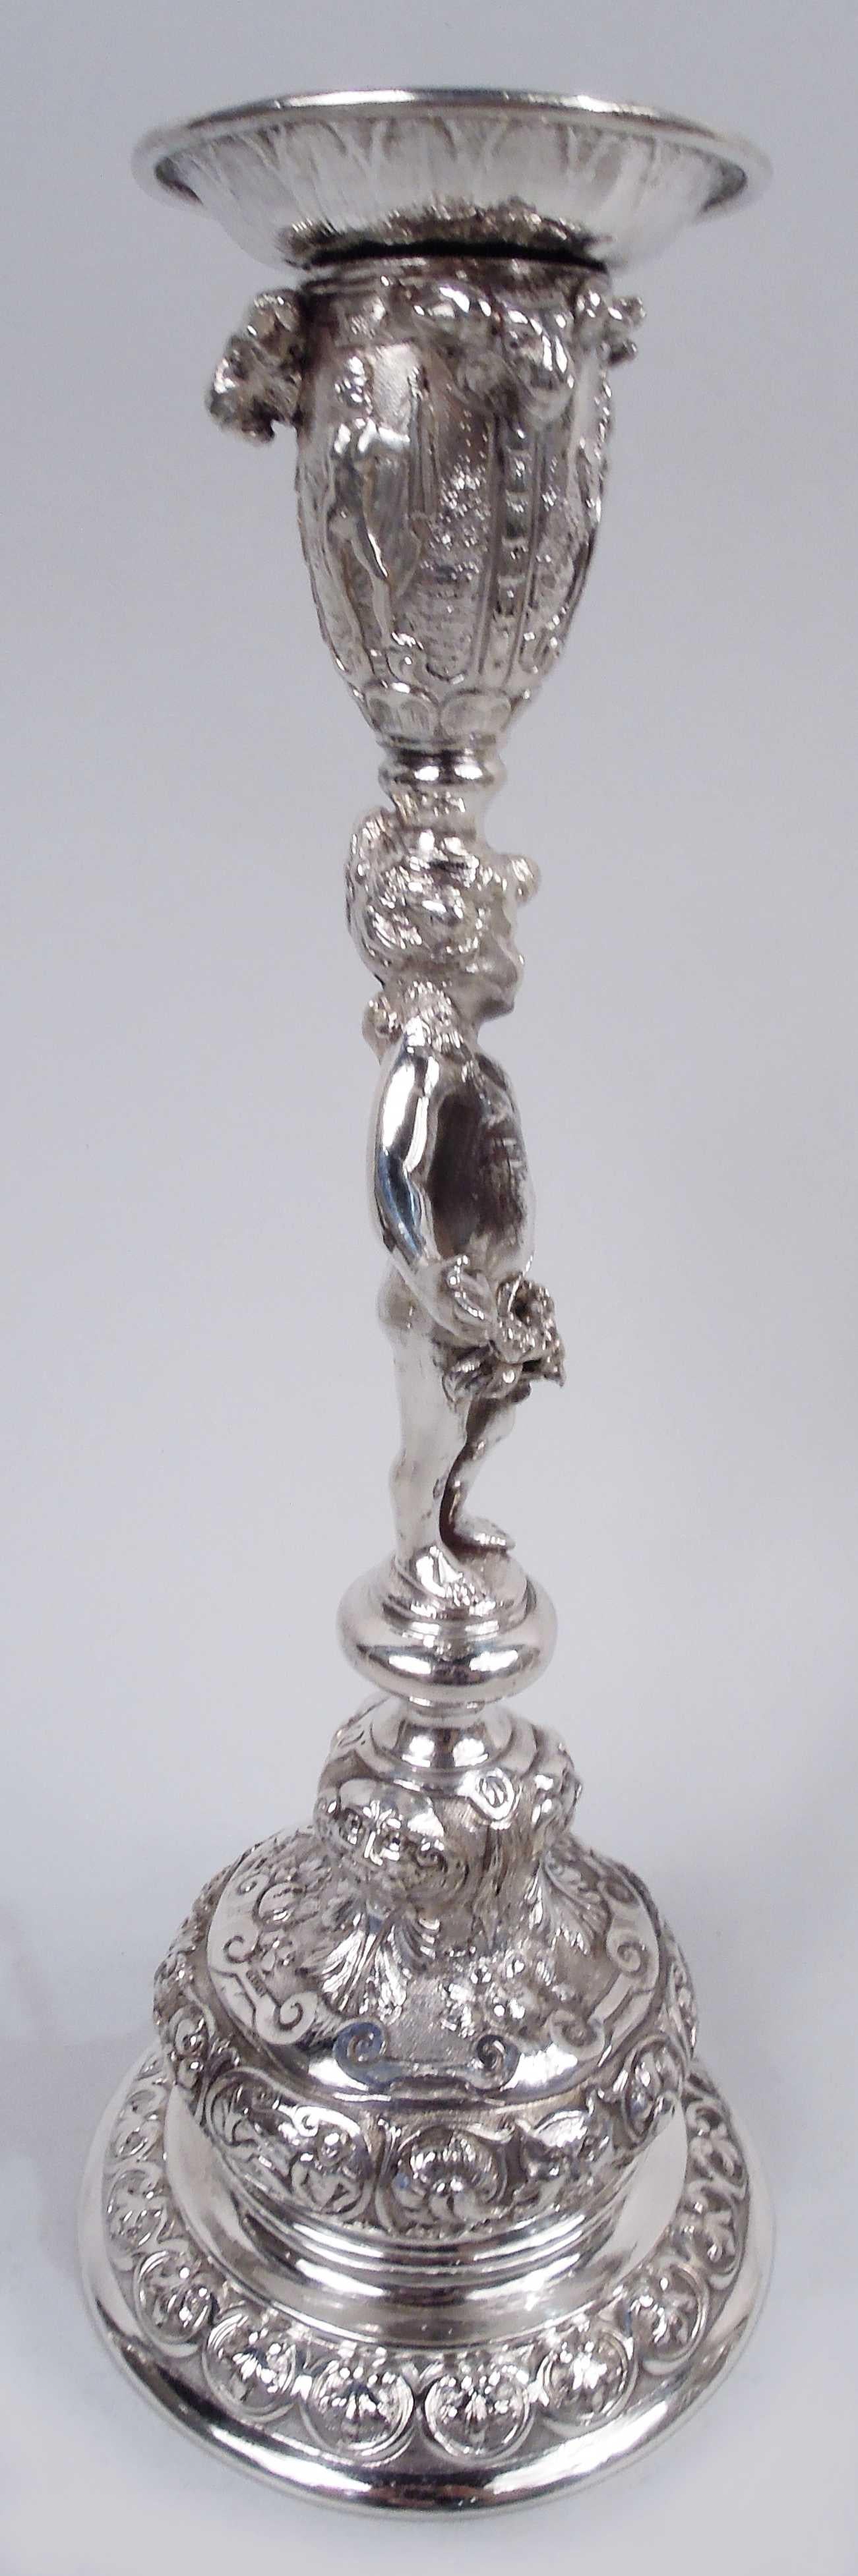 20th Century Set of 4 German Rococo Classical Silver Figural Candlesticks